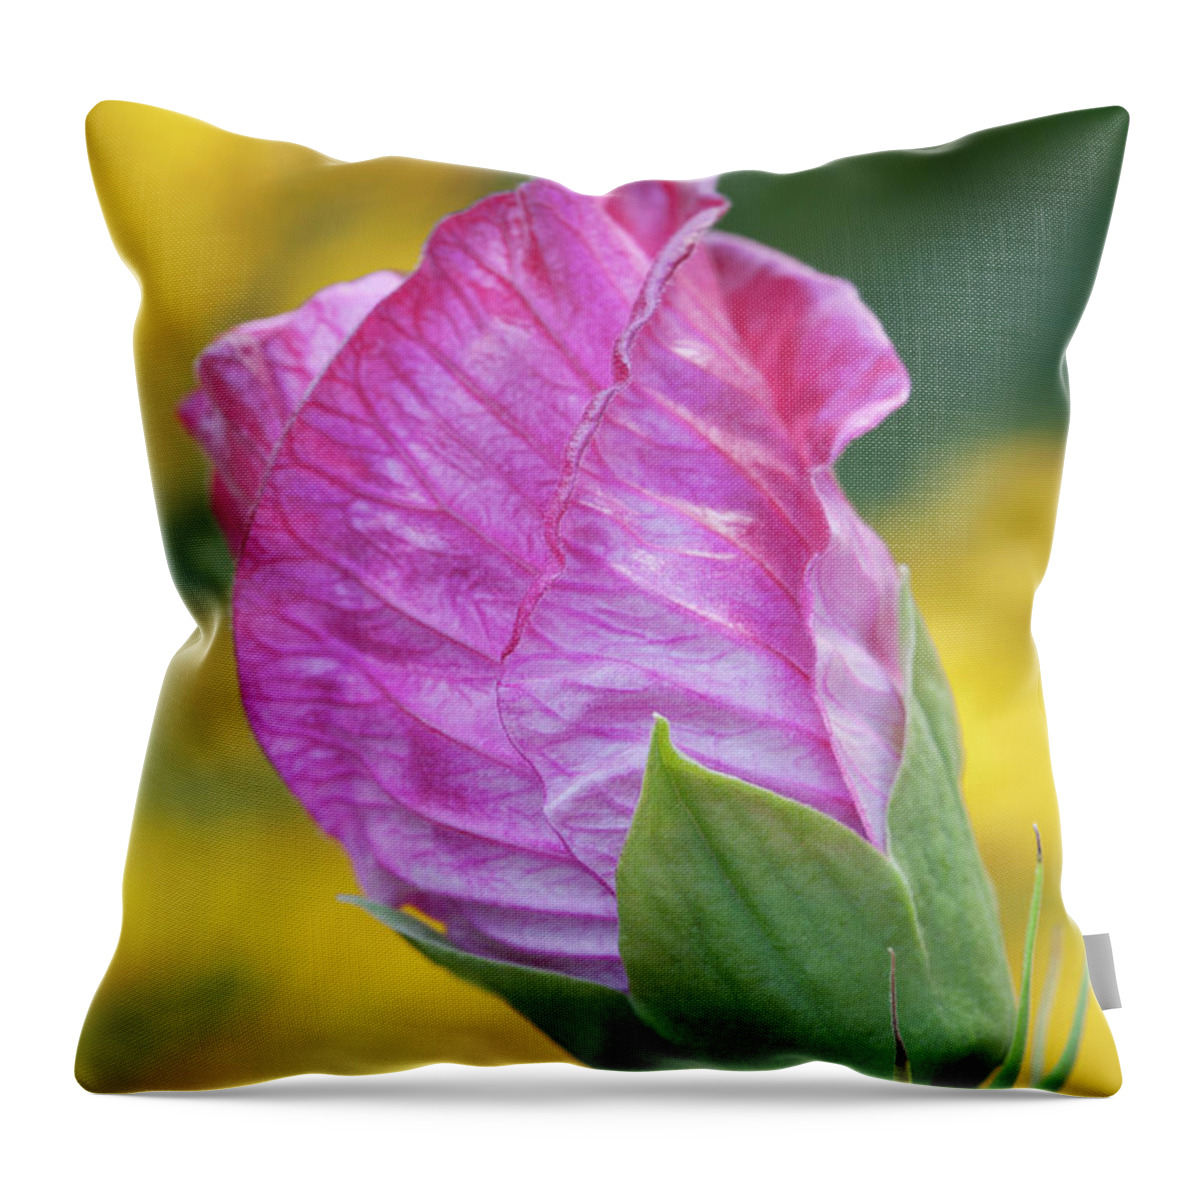 Flower Throw Pillow featuring the photograph Flower#1595_0102 by James Baron